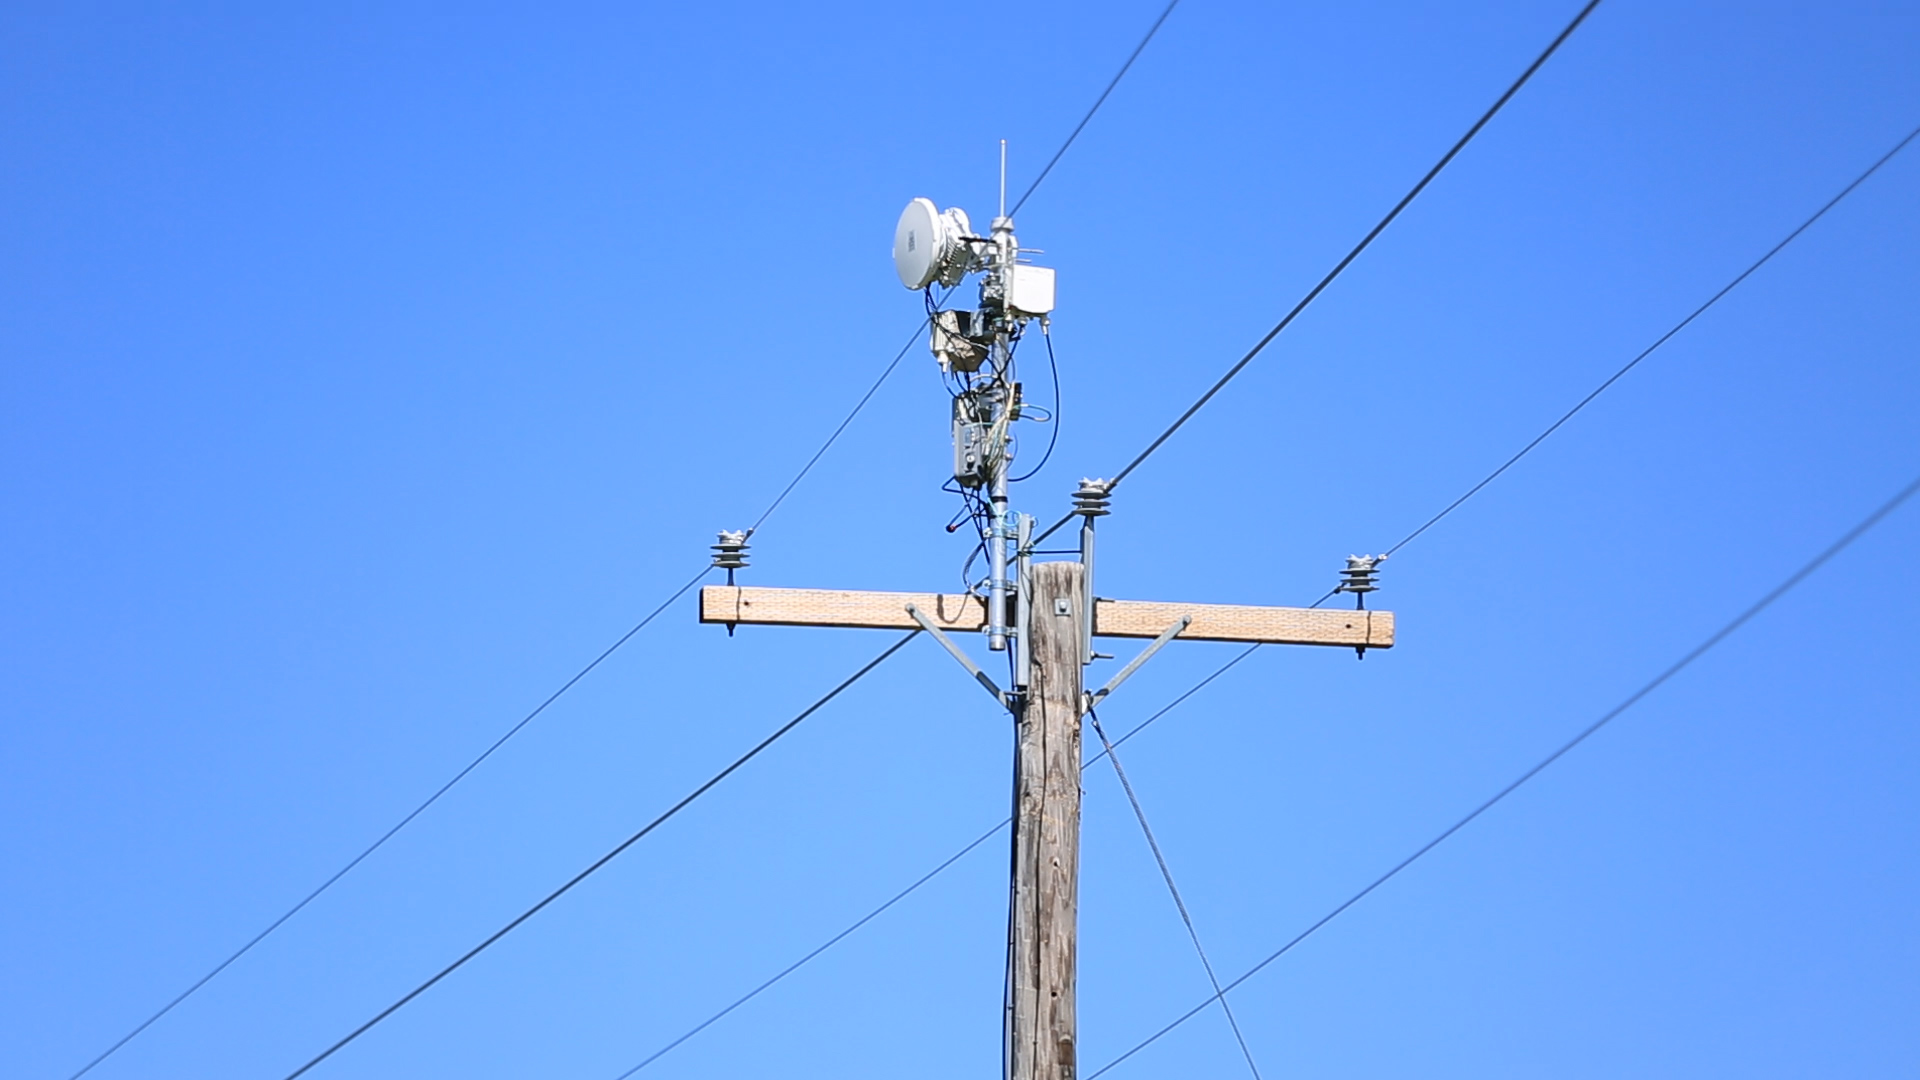 AT&T Project AirGig will use the existing power grid to propagate millimeter wave signals